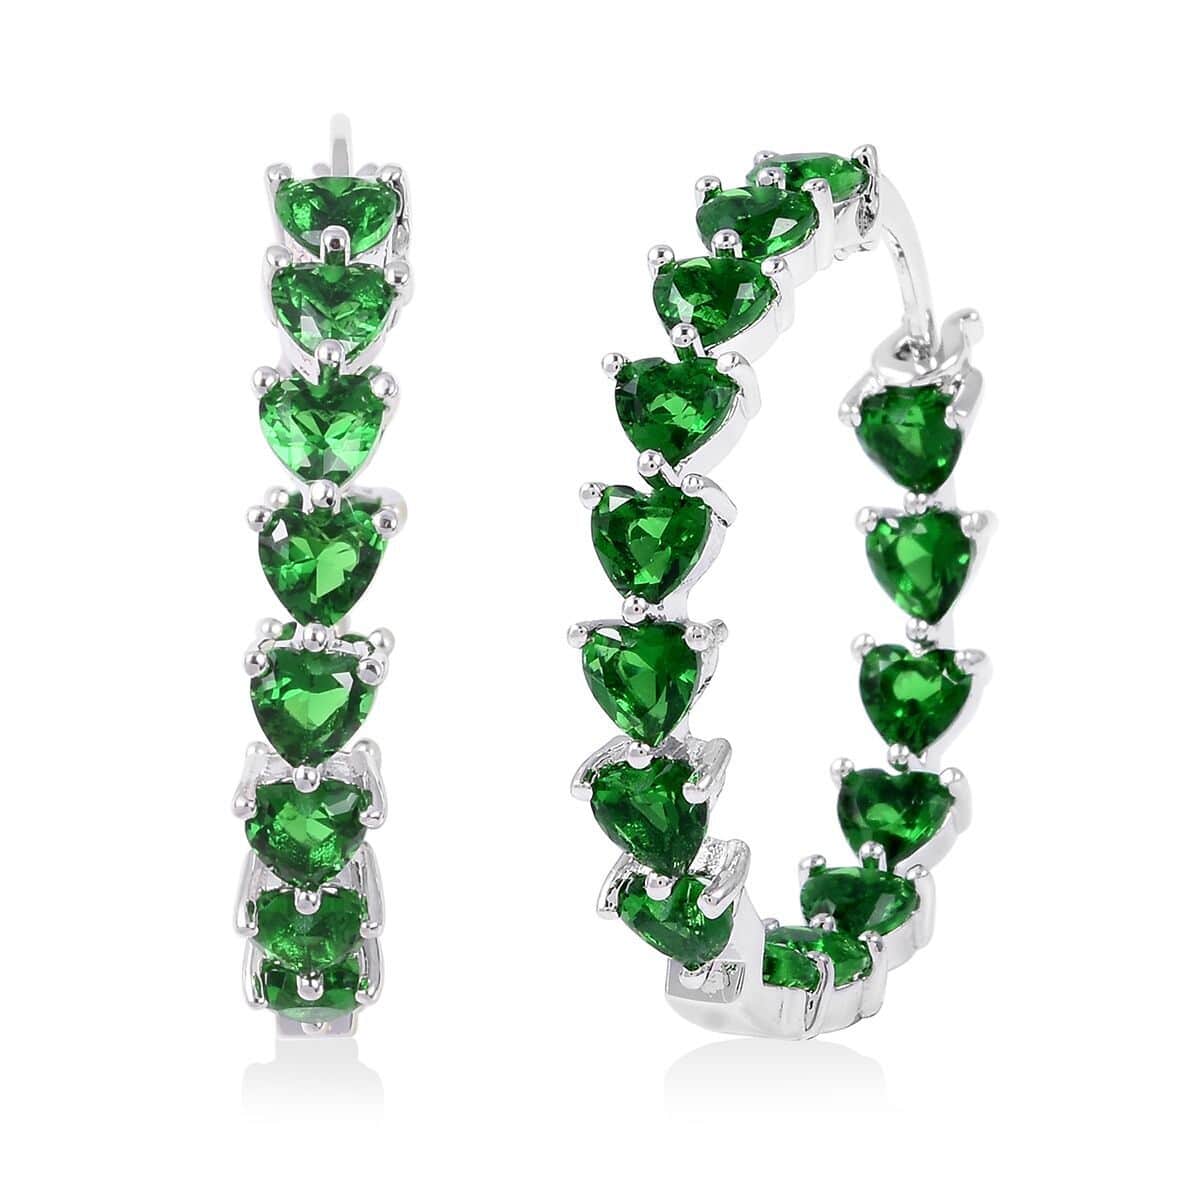 Simulated Green Diamond Earrings in Silvertone, Inside Out Hoops, Simulated Diamond Jewelry For Women image number 0